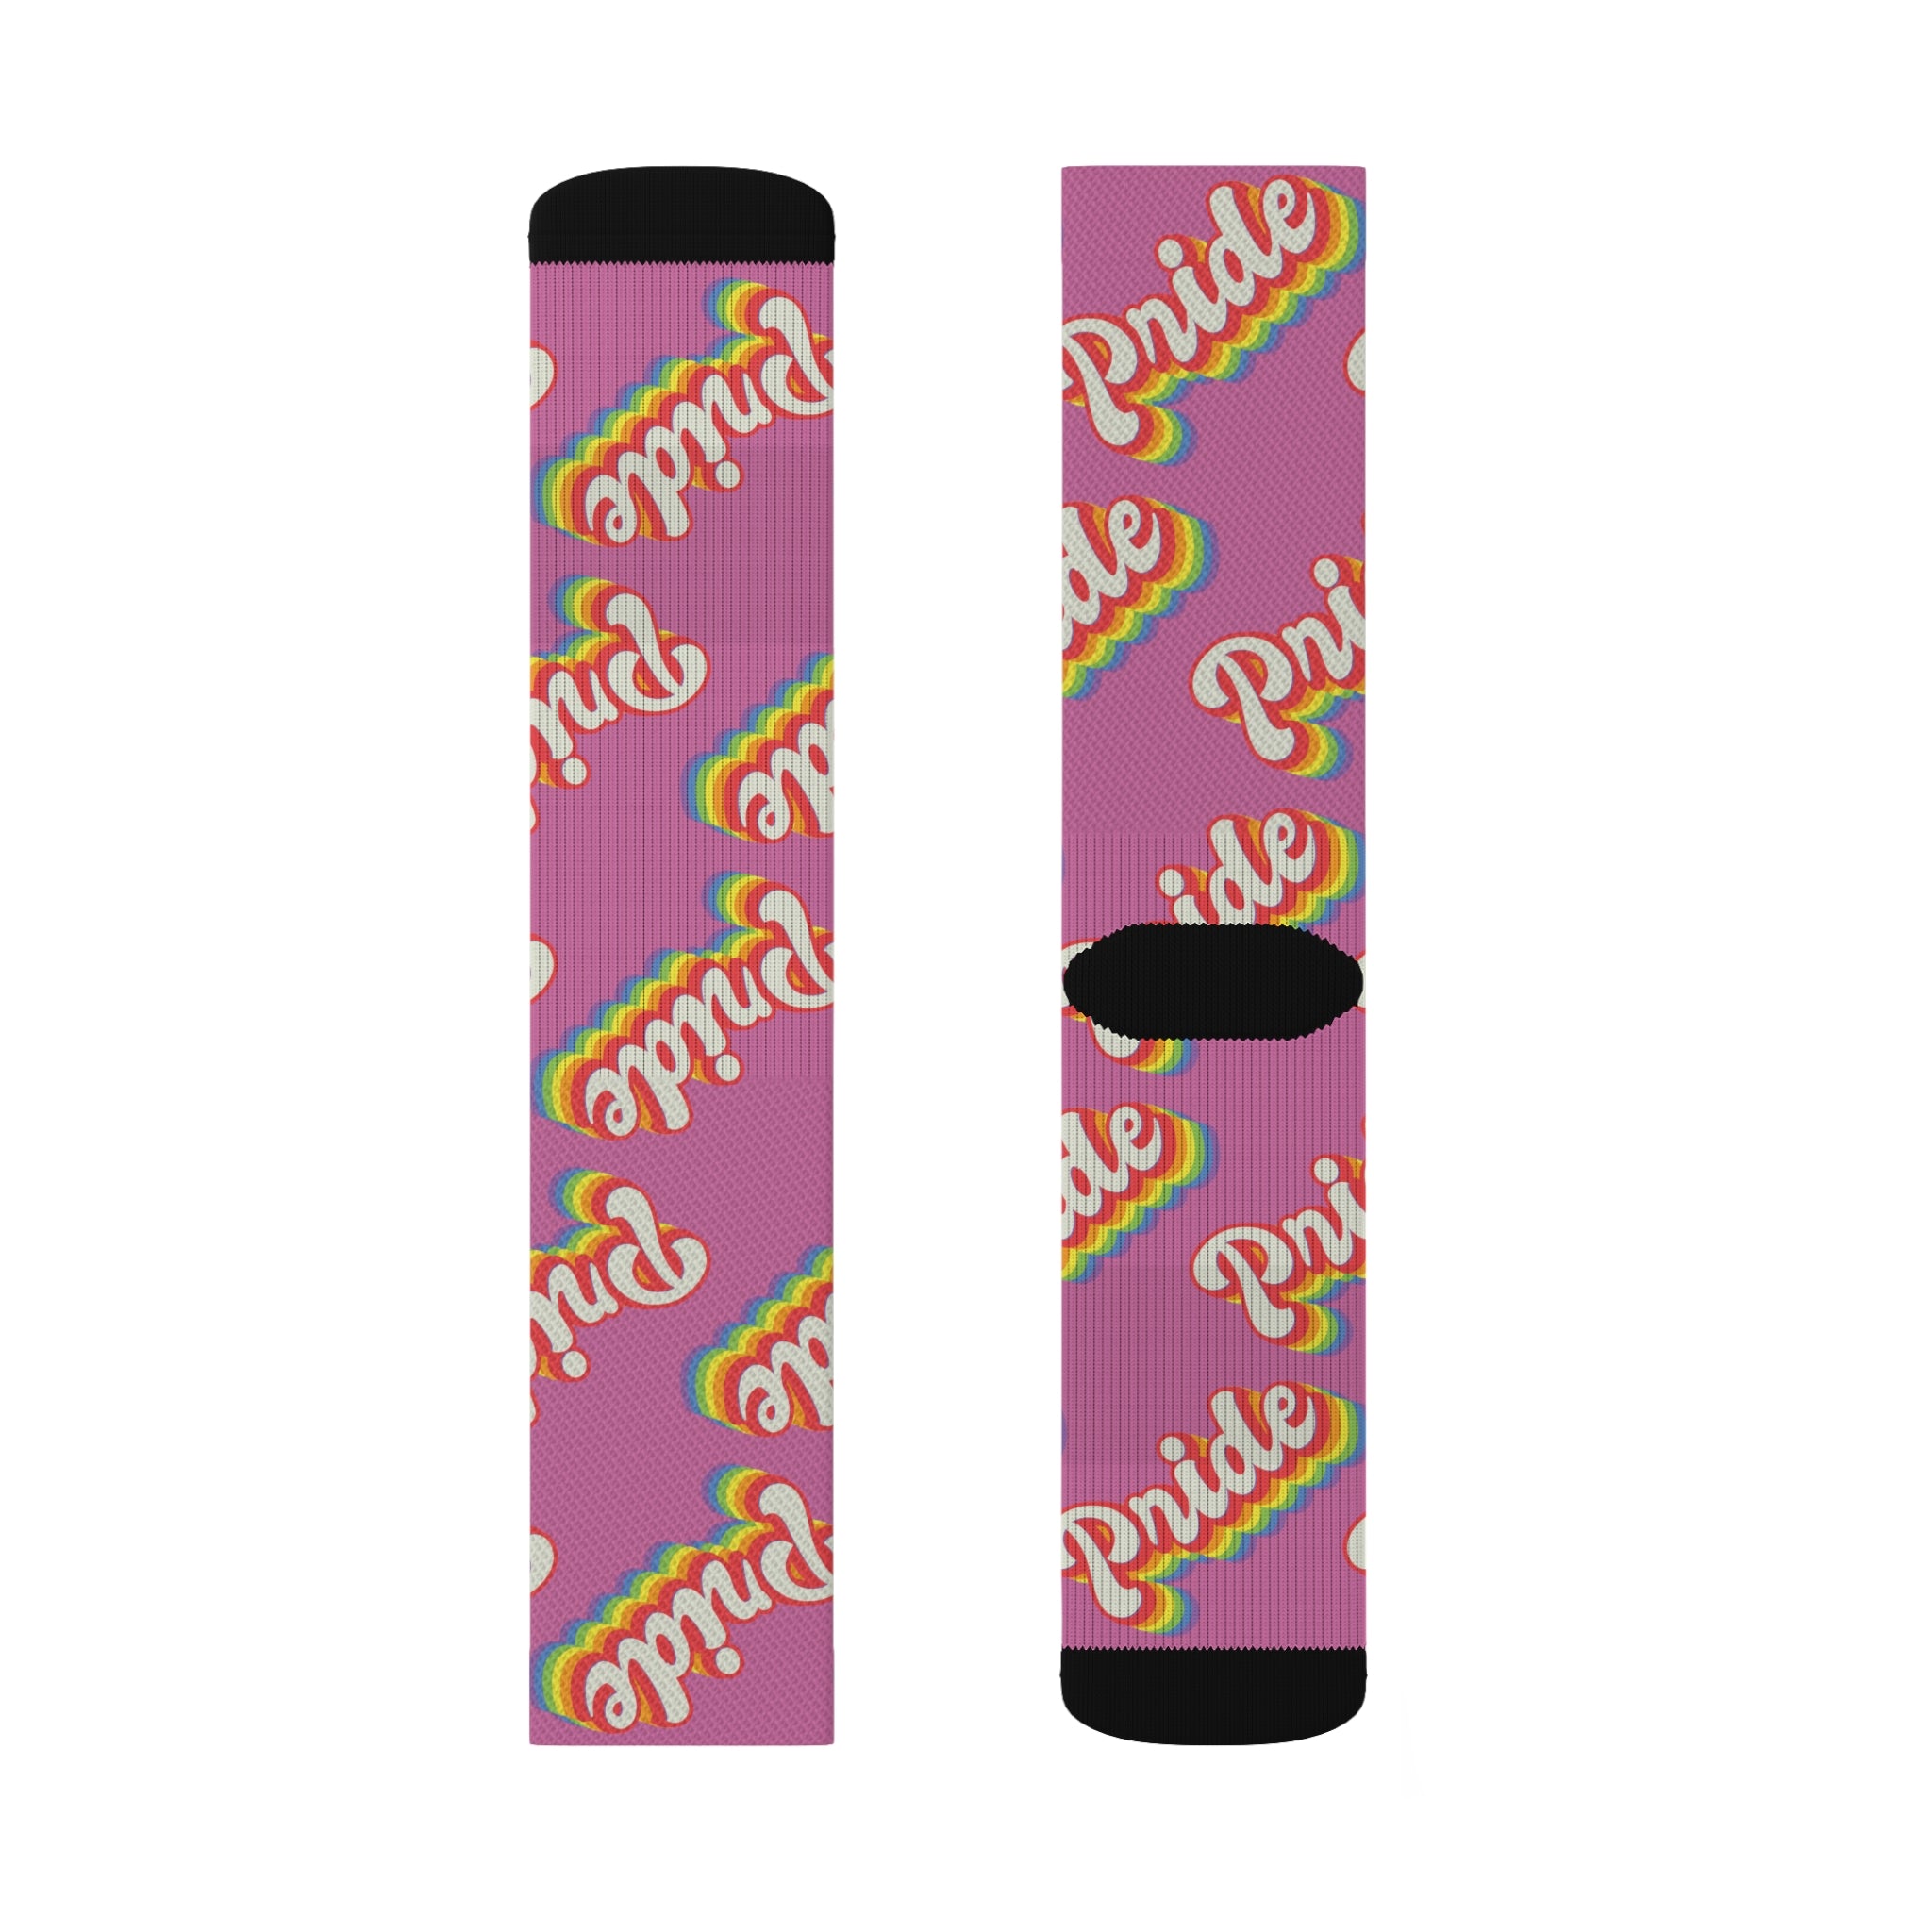 These Pride Socks feature a sublimated print, offering both comfort and style.